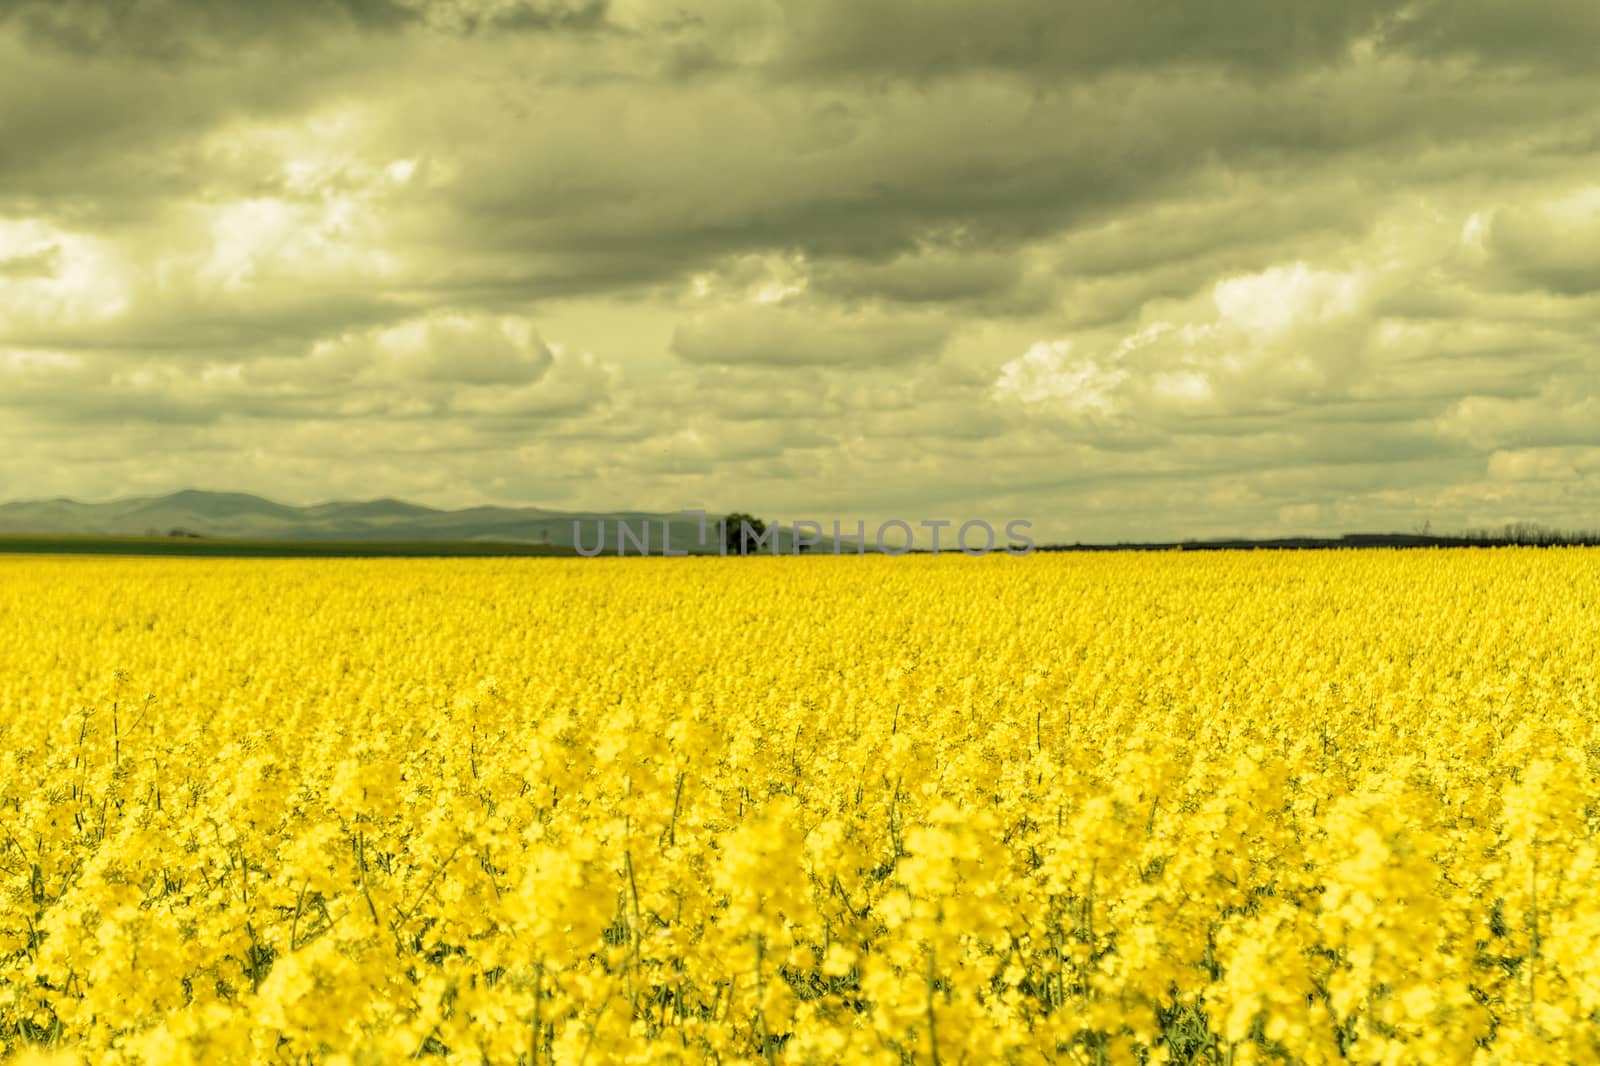 Field of rapeseed against sky with clouds